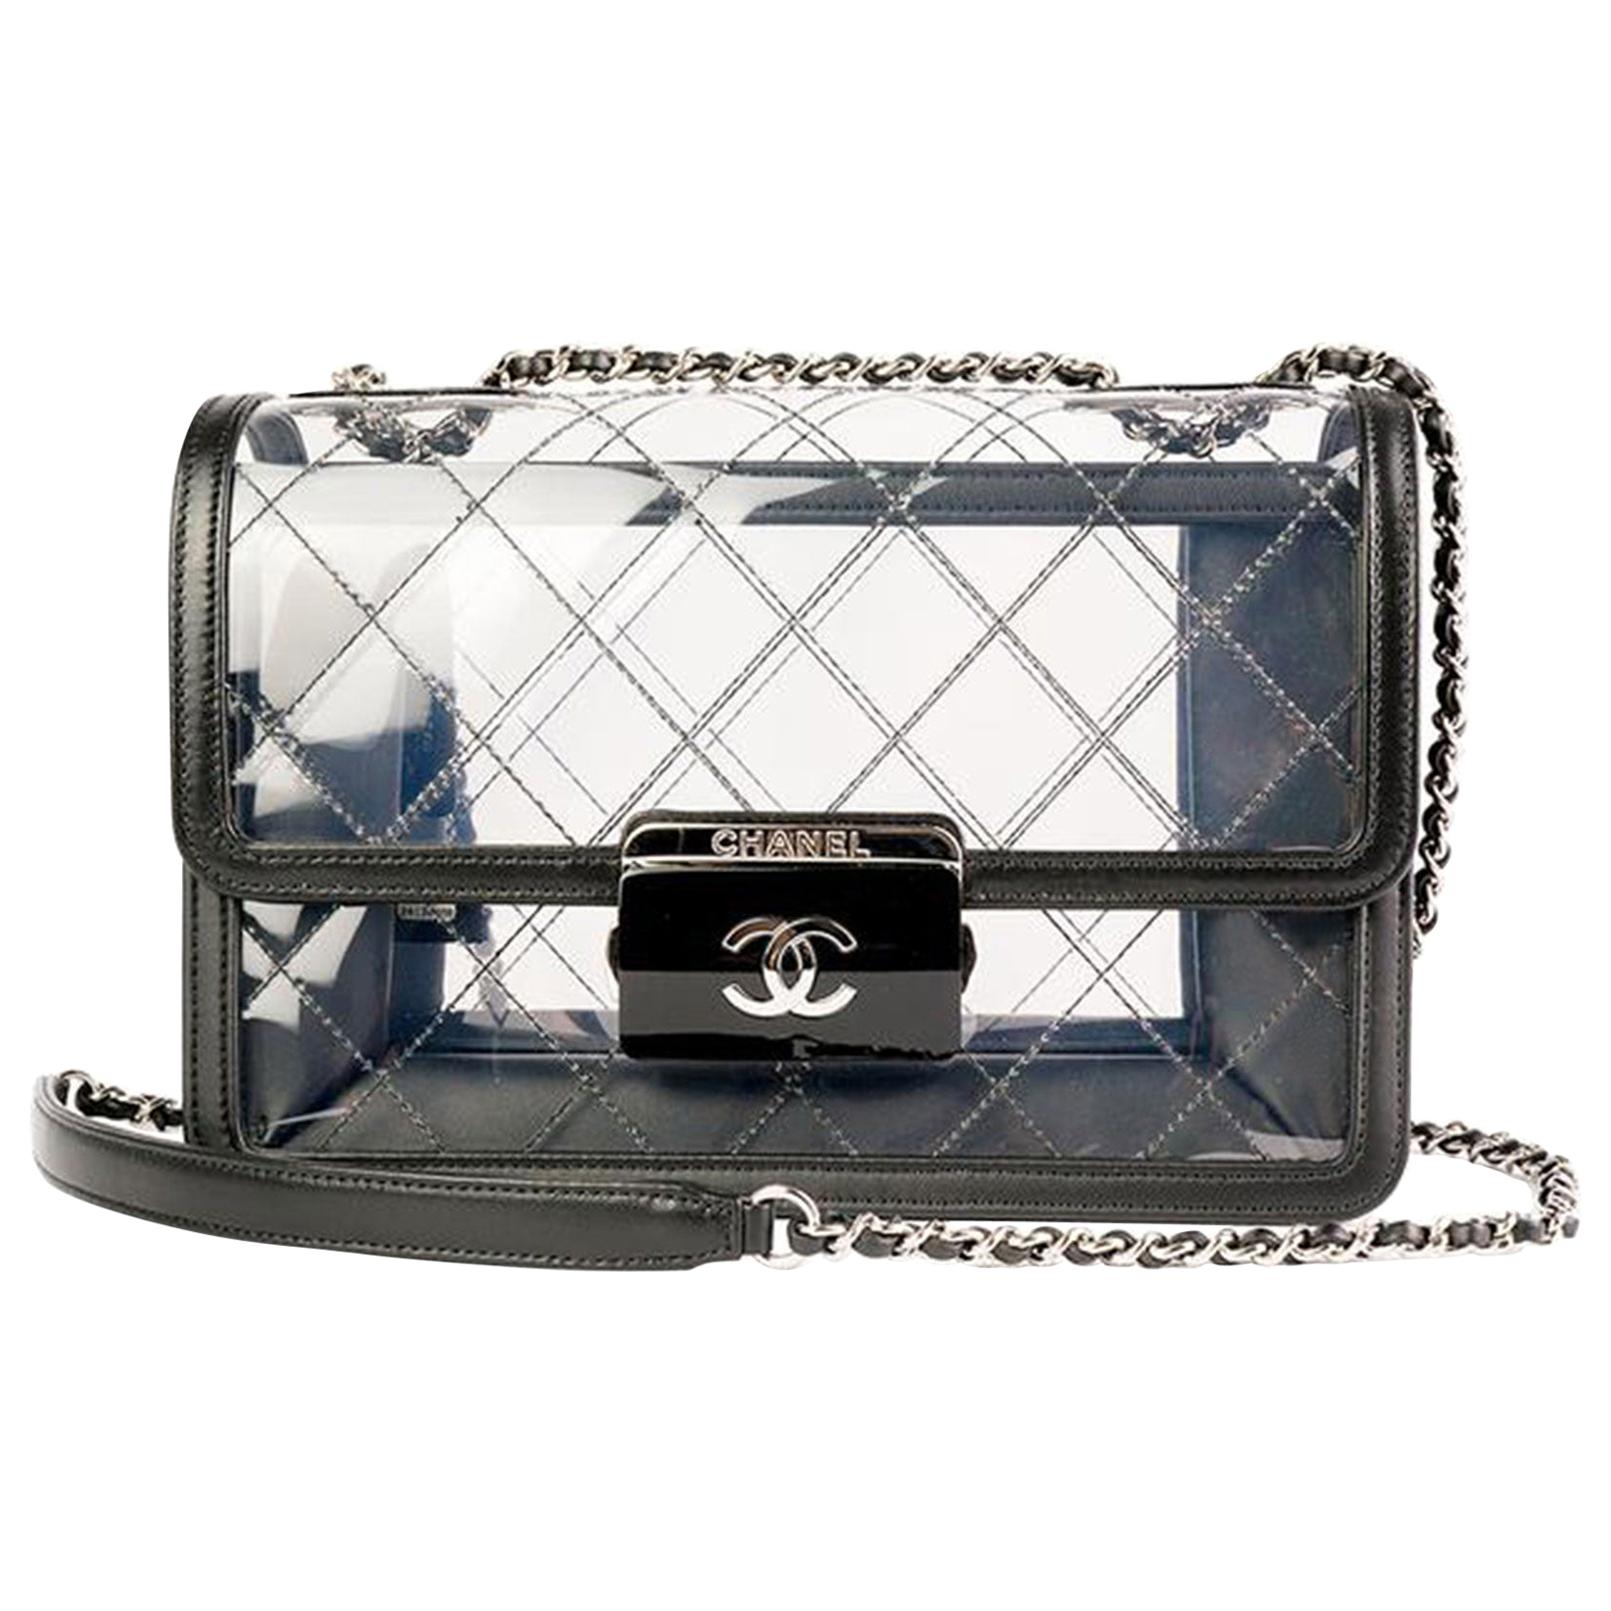 Chanel Naked Transparent Multi Compartment Flap Bag